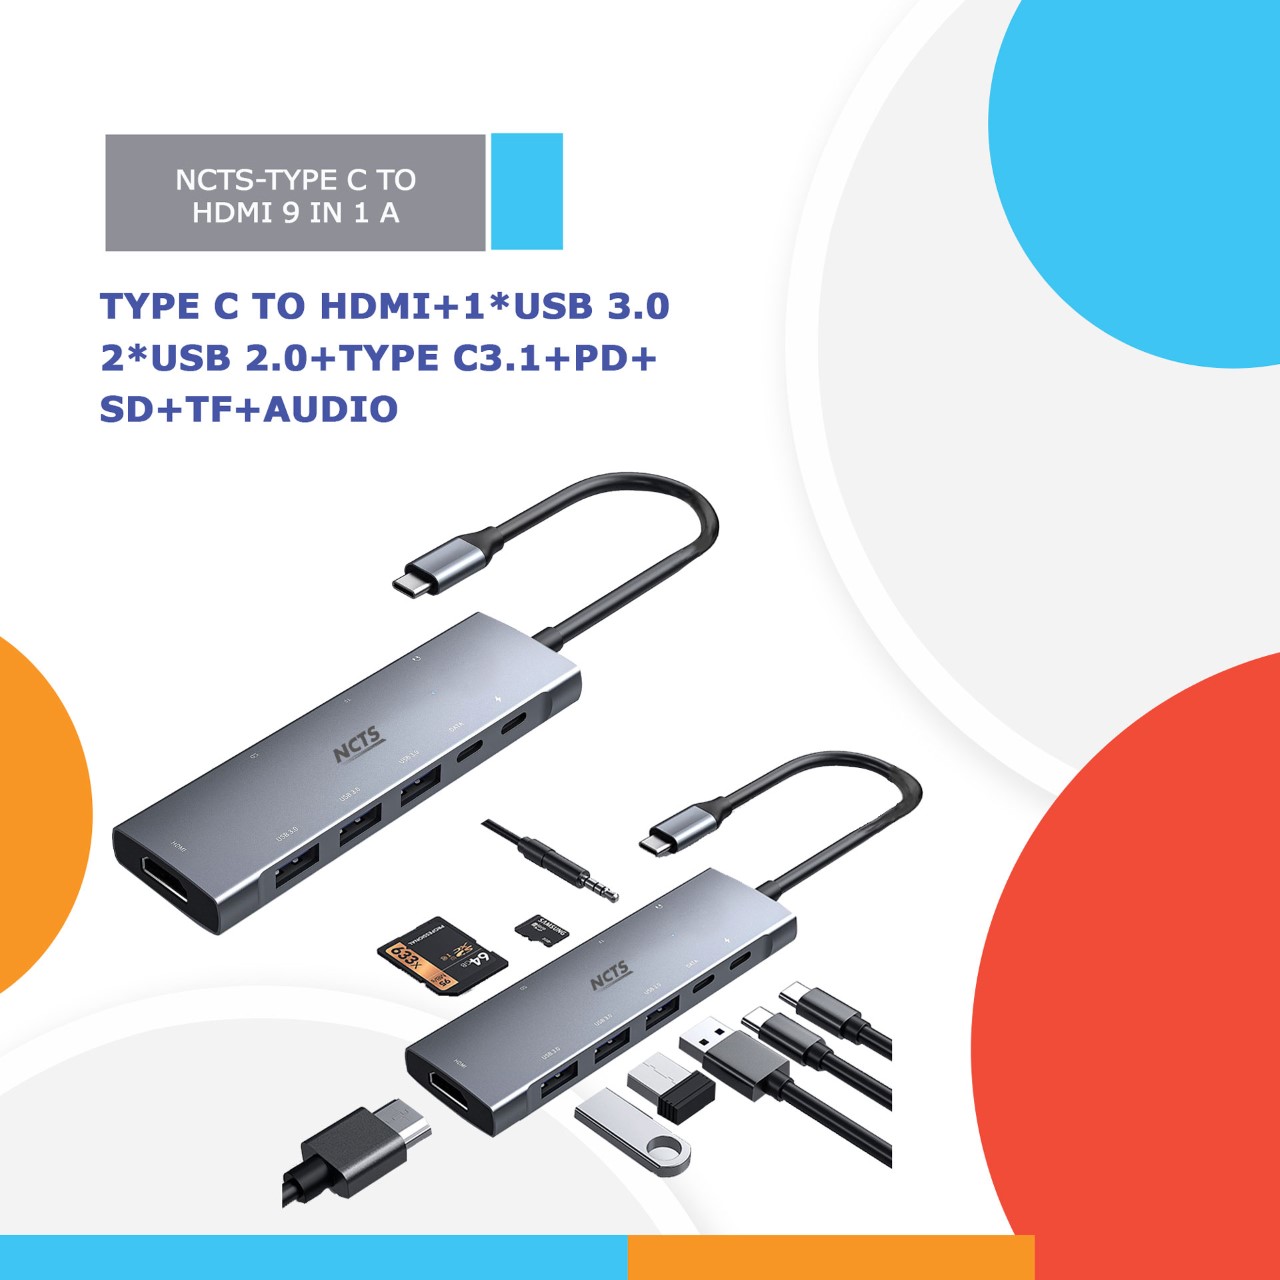 NCTS-TYPE C TO HDMI 9 IN 1 A